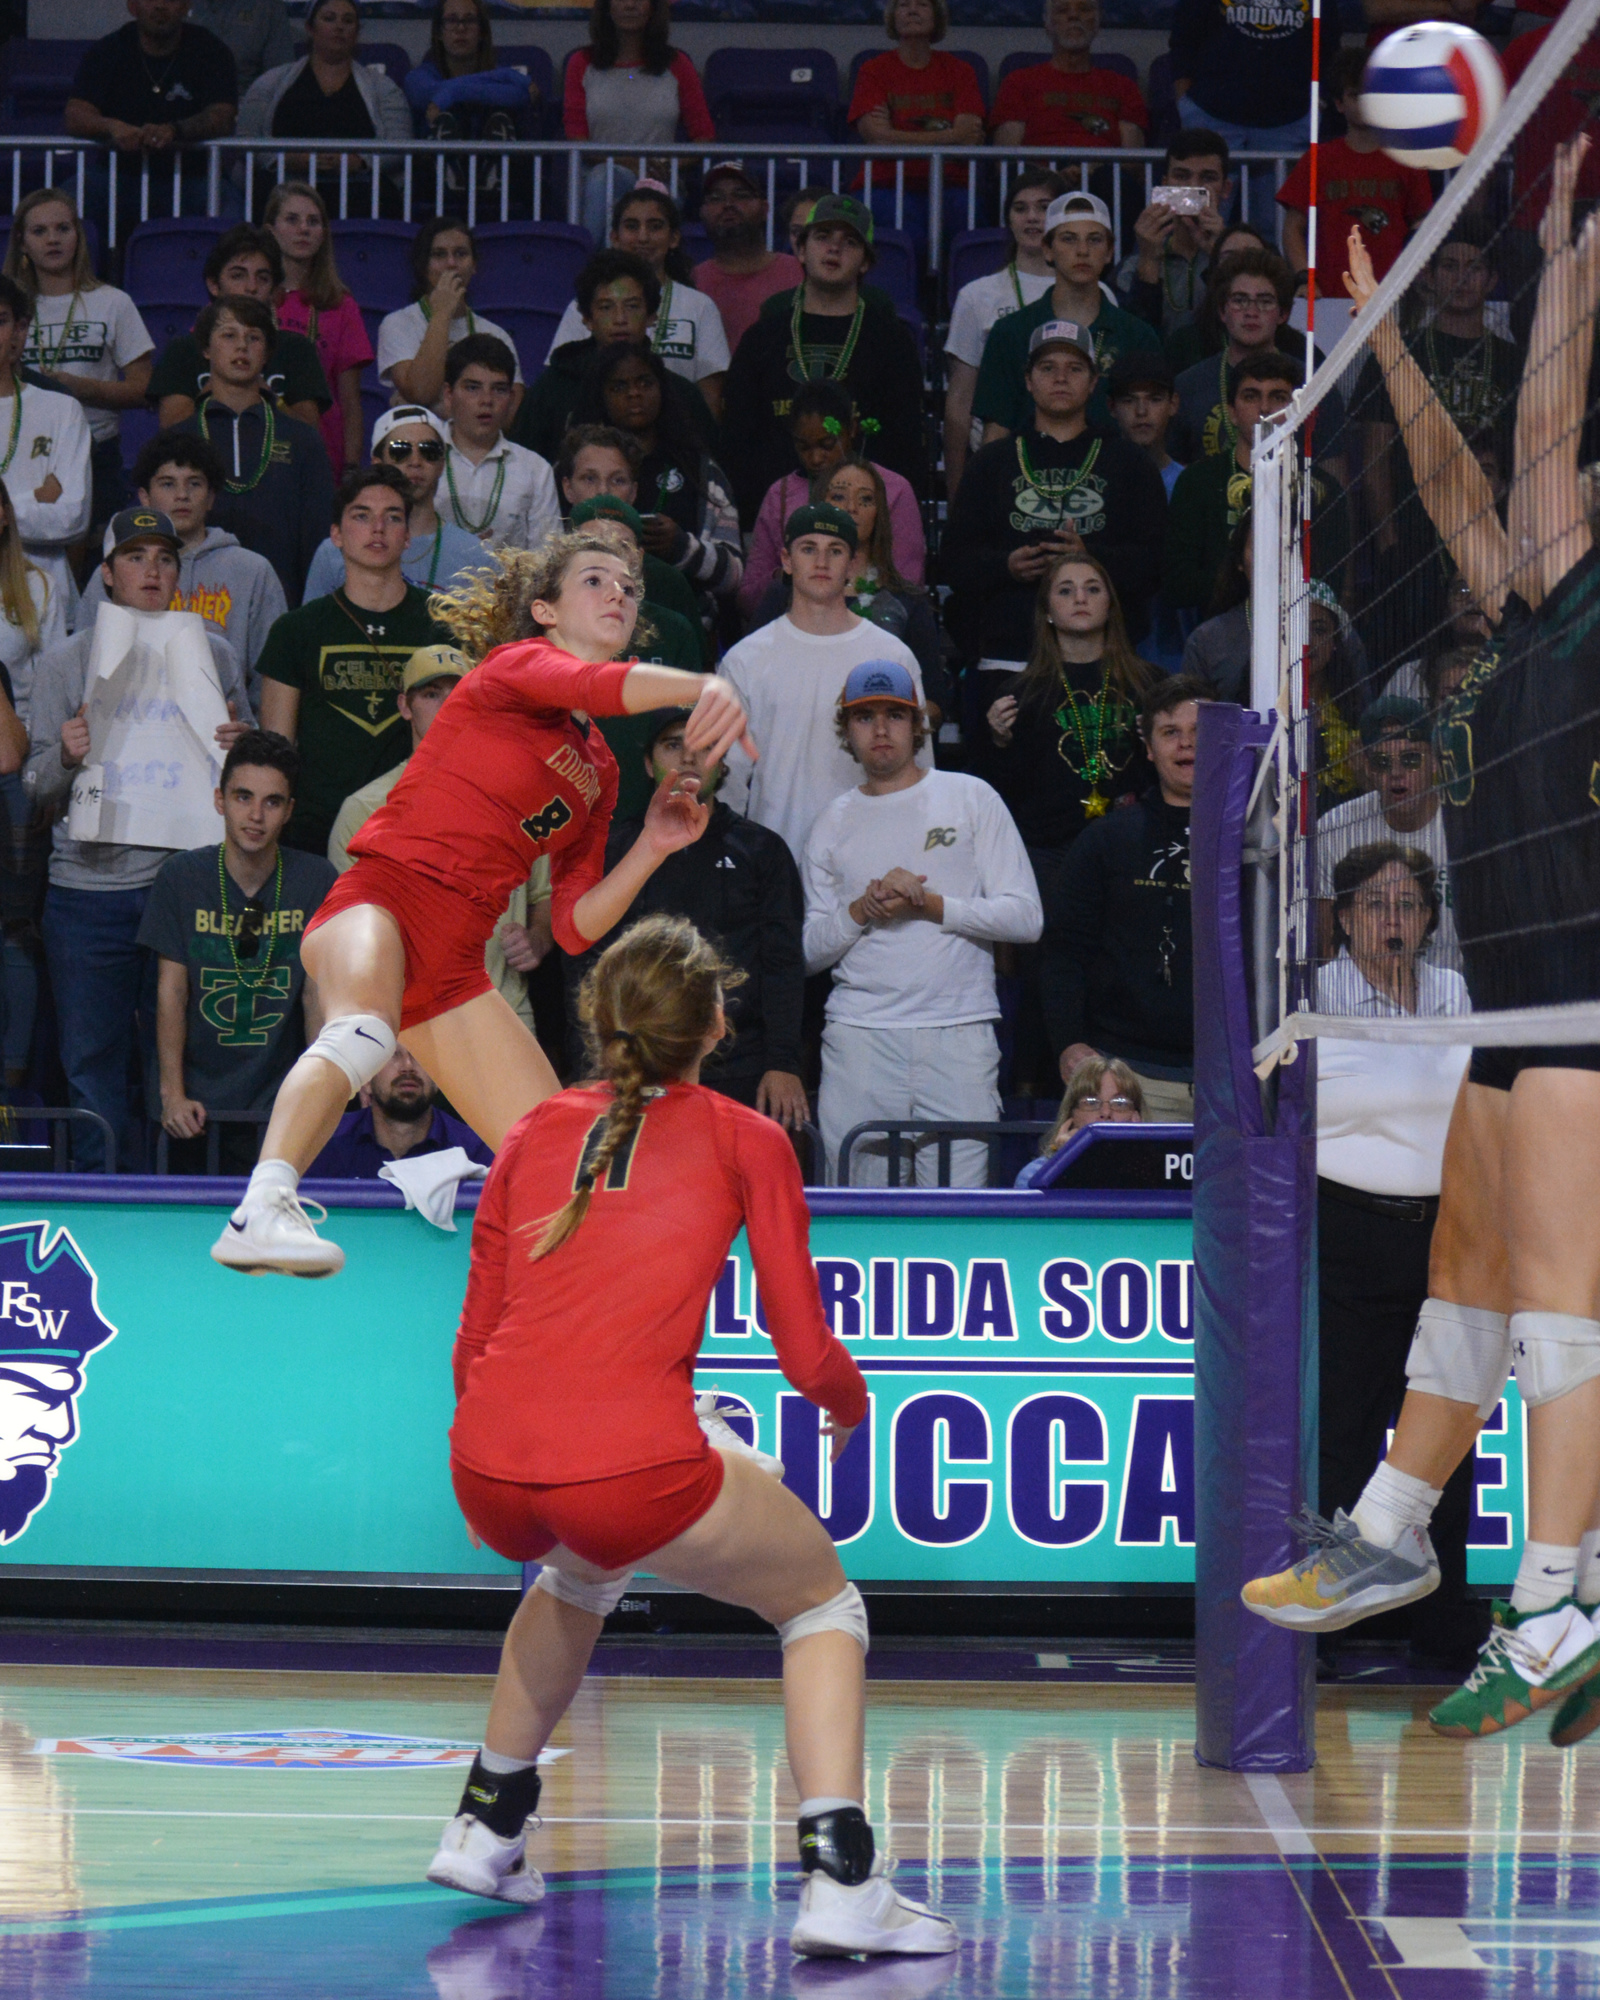 5. Cougars junior Sophia Hritz leaps for a kill attempt in the state title game, which the program reached for the first time. She finished with 12 kills.